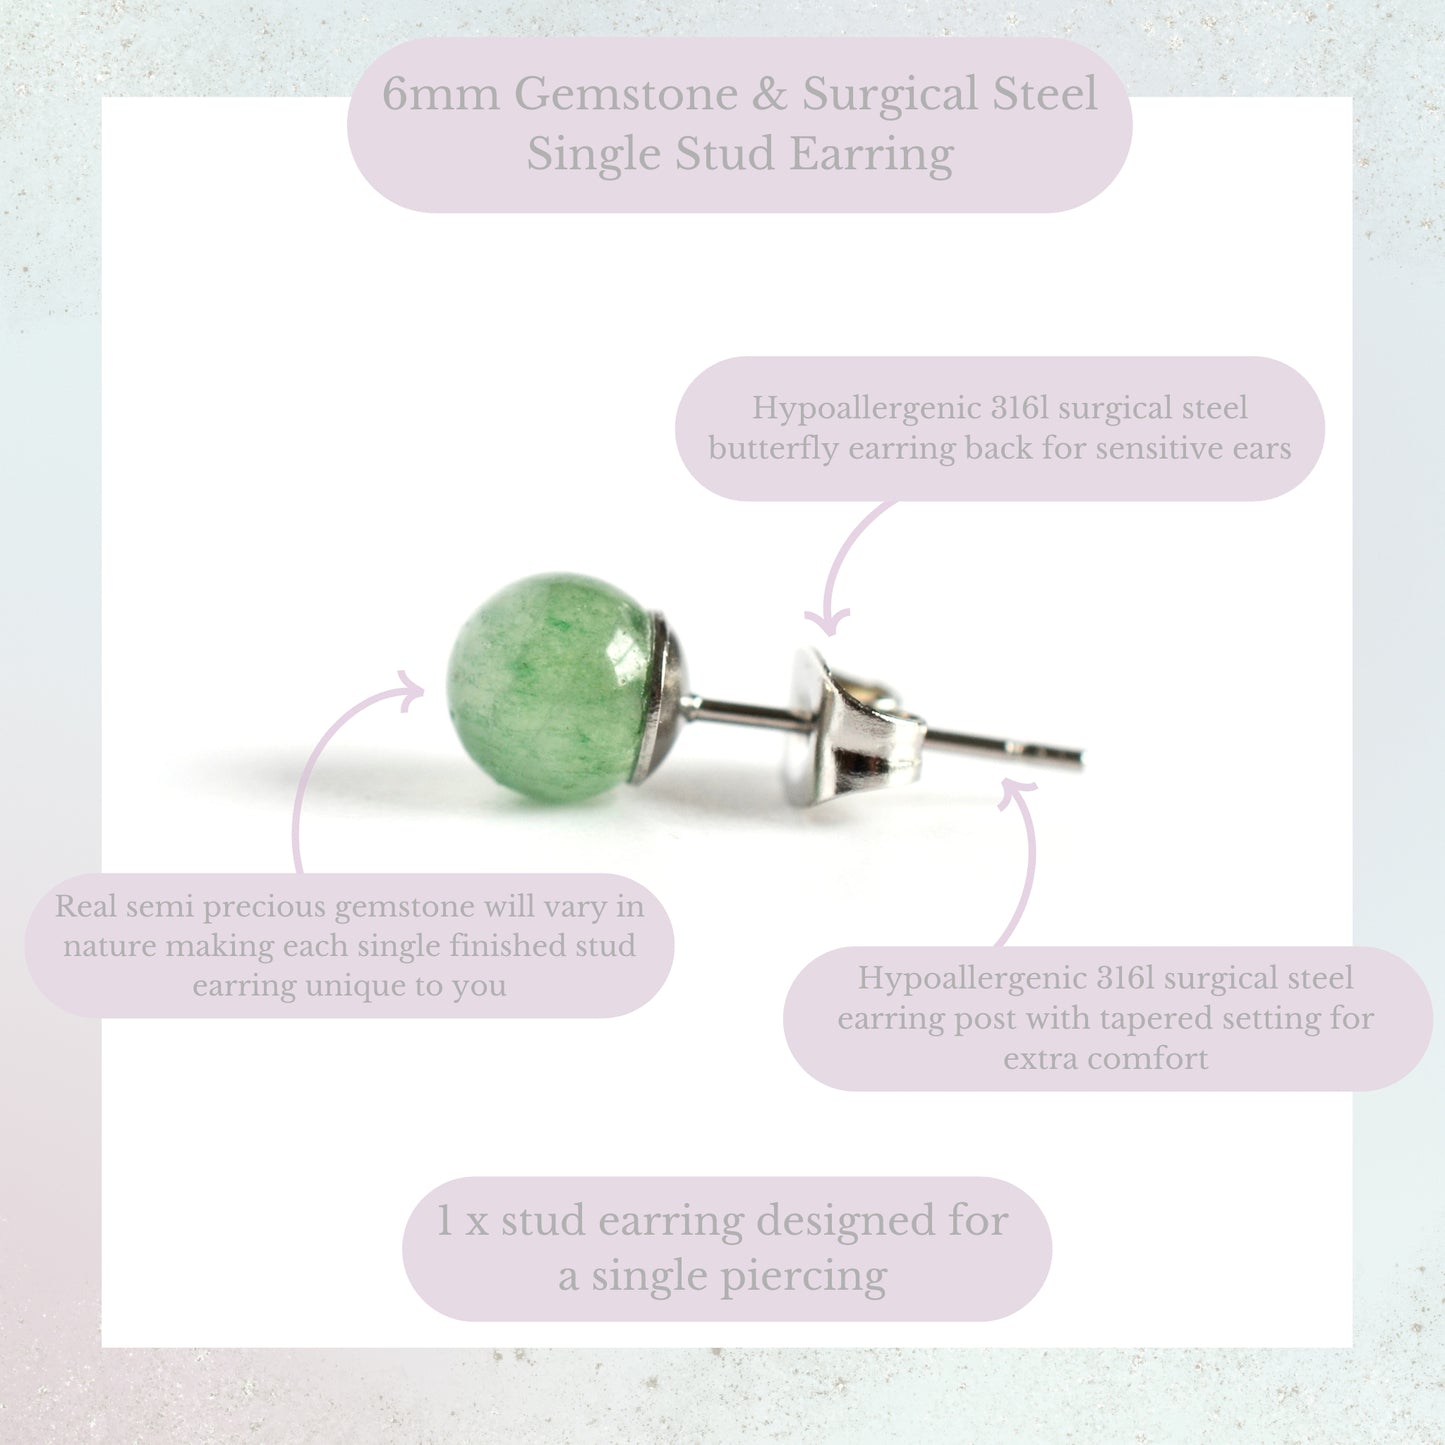 Product information graphic for 6mm gemstone & surgical steel single stud earring